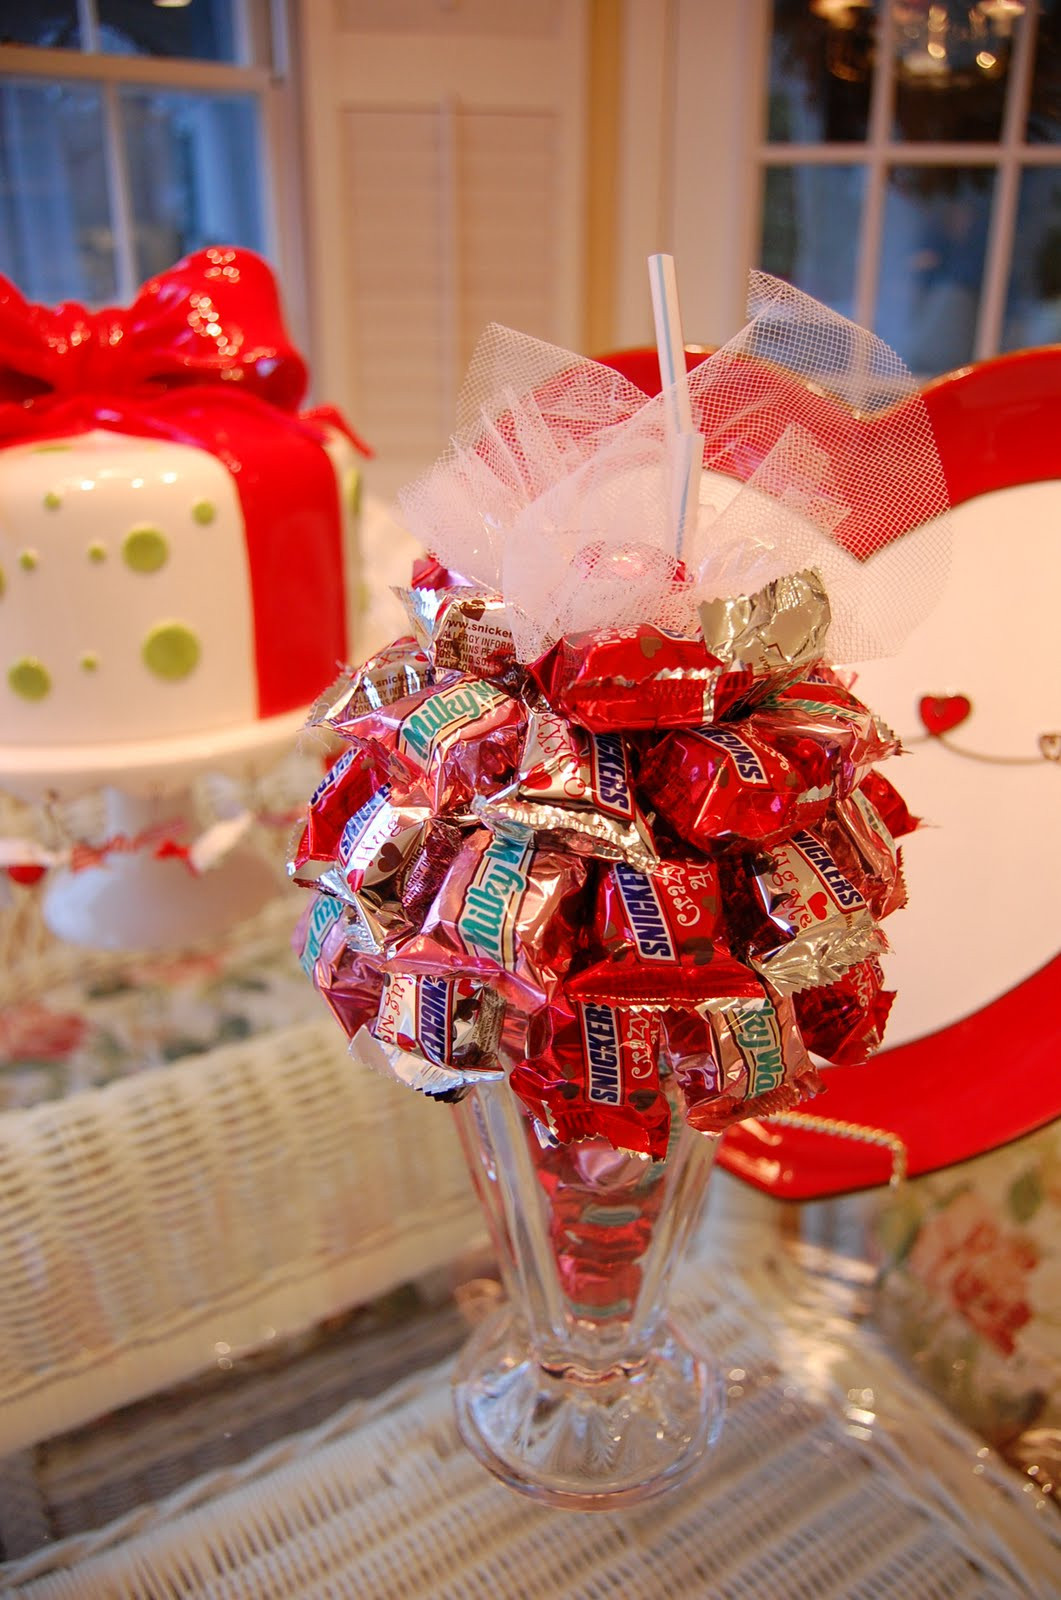 Valentine Candy Gift Ideas
 Valentine’s Day Craft and Gift